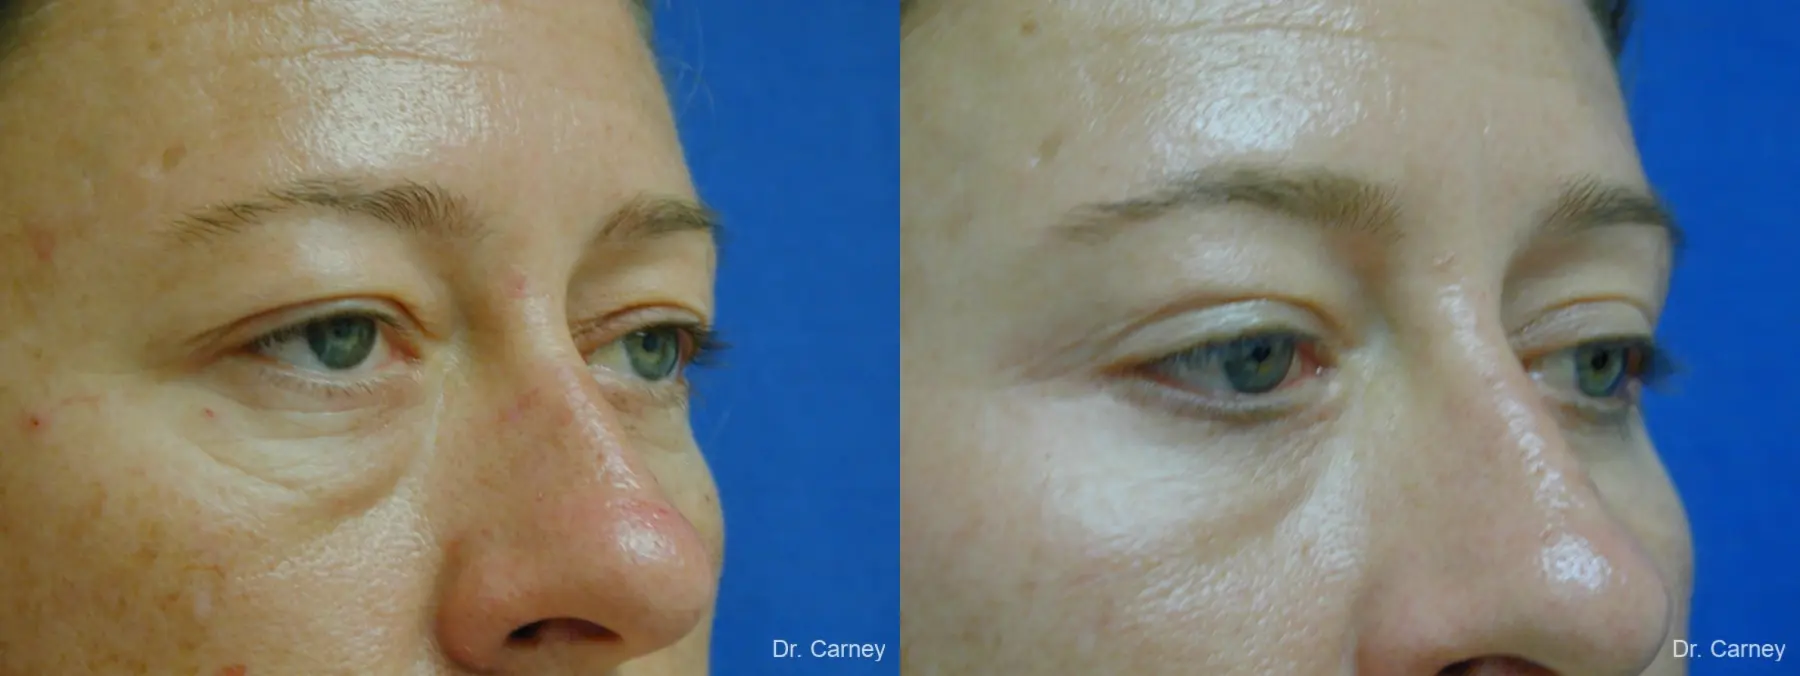 Virginia Beach Eyelid Lift 1209 - Before and After 2